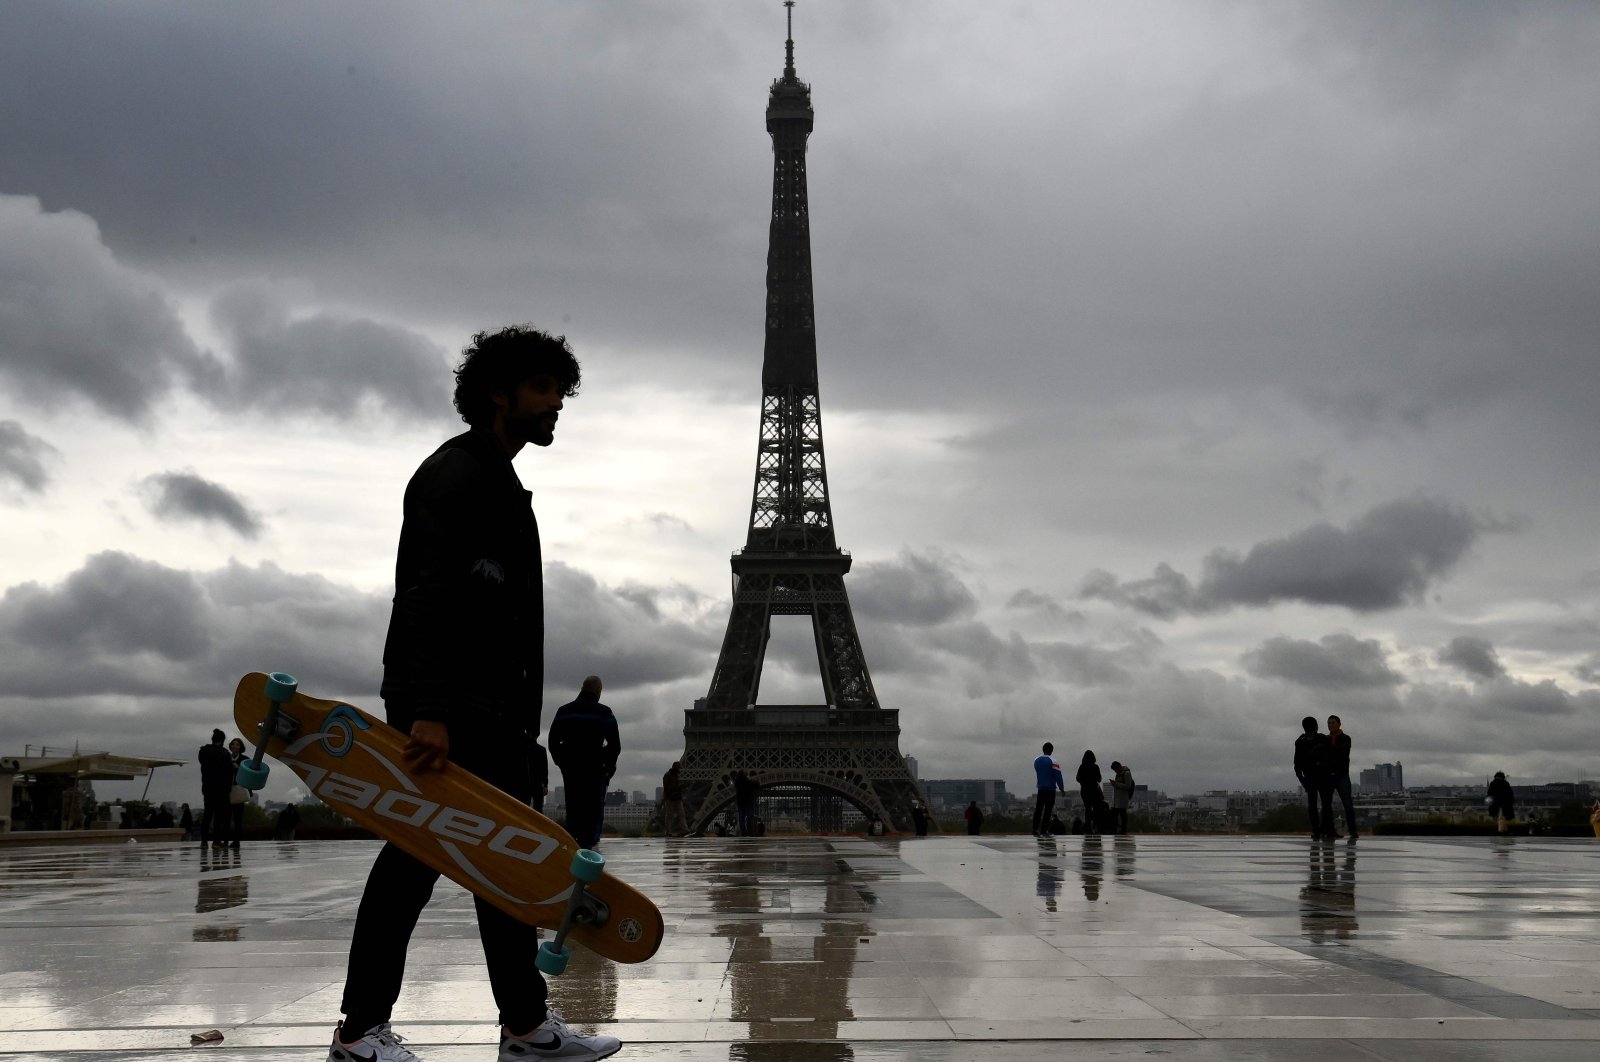 A man stands holding a longboard on the Trocadero Esplanade, as the Eiffel Tower is seen in the background, in Paris, France, Sept. 30, 2020. (AFP Photo)